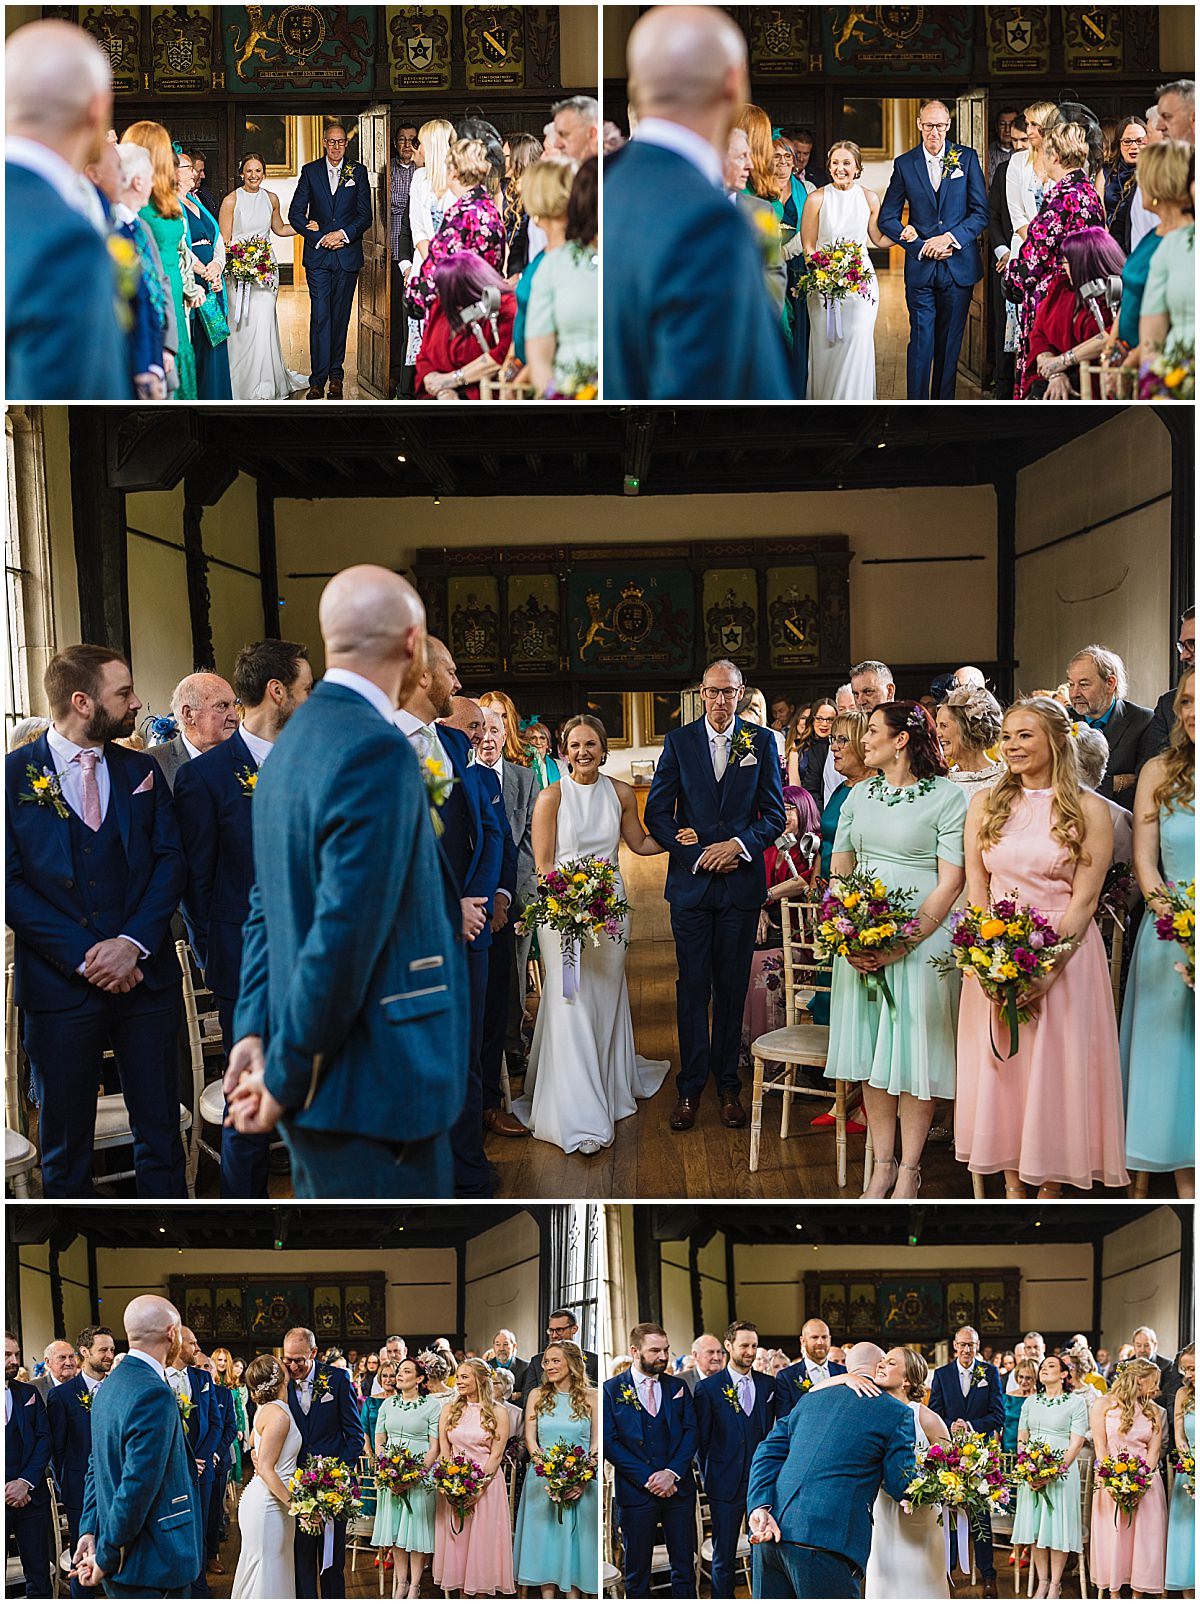 A collage of wedding ceremony photos in a room with historical decor. The top two images show a bride in a white dress and her father in a blue suit walking down the aisle, smiling and looking at guests. The bottom left image captures the groom, facing away from the camera, watching the bride approach. The bottom right image features the bride and groom at the altar with the bridal party lined up on either side, wearing pastel dresses and blue suits, and the groom is leaning in for a kiss on the bride's cheek.